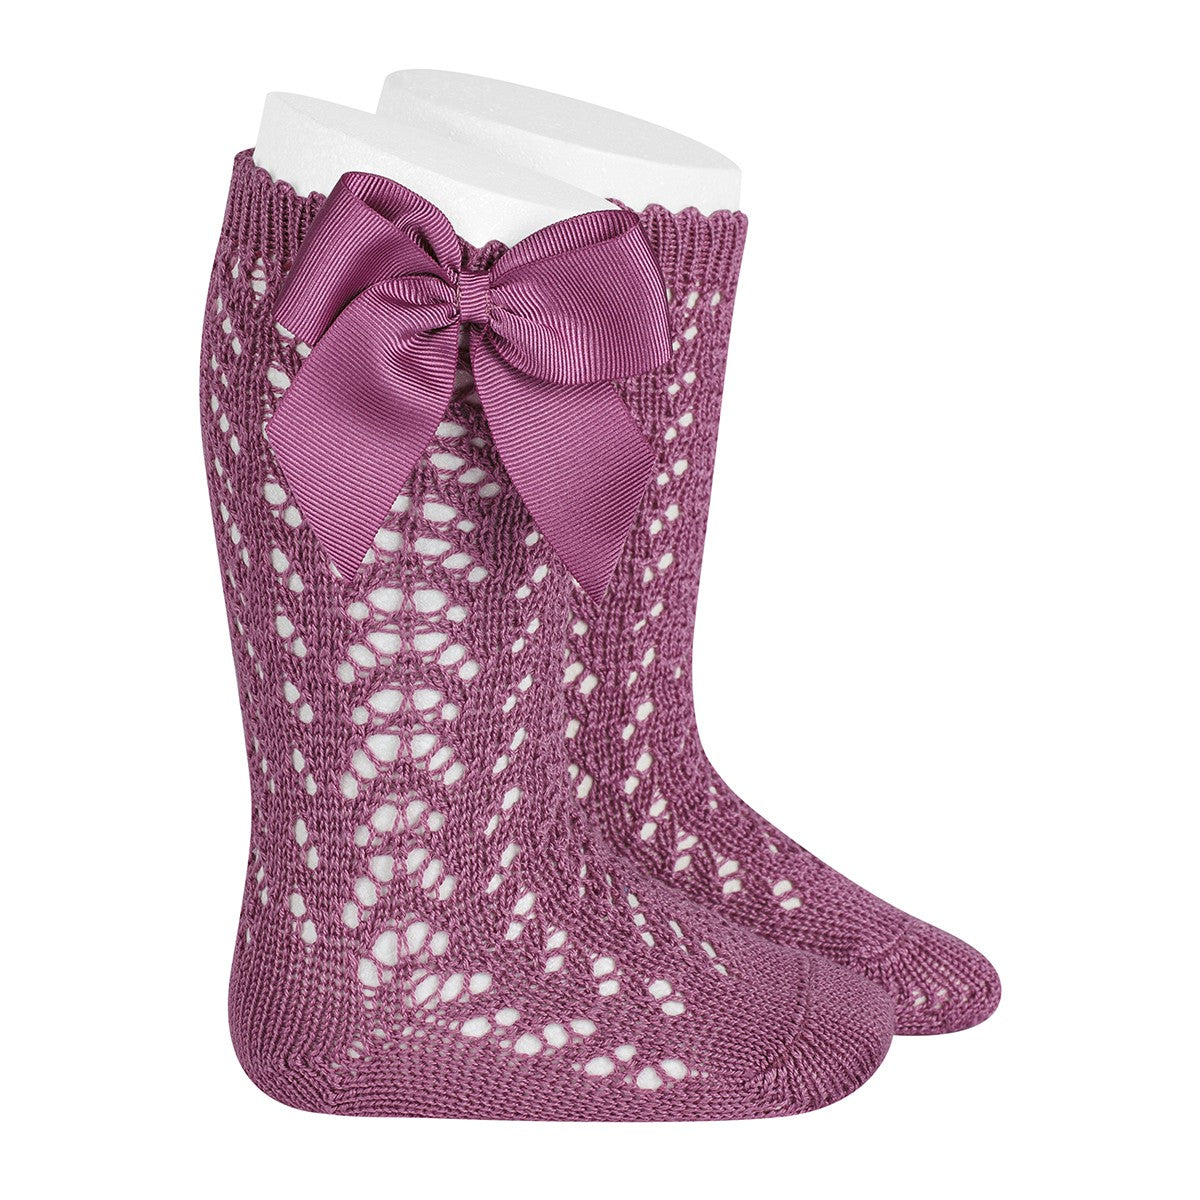 Socks - CASSIS   - Perle openwork knee-high socks with bow-25192-669